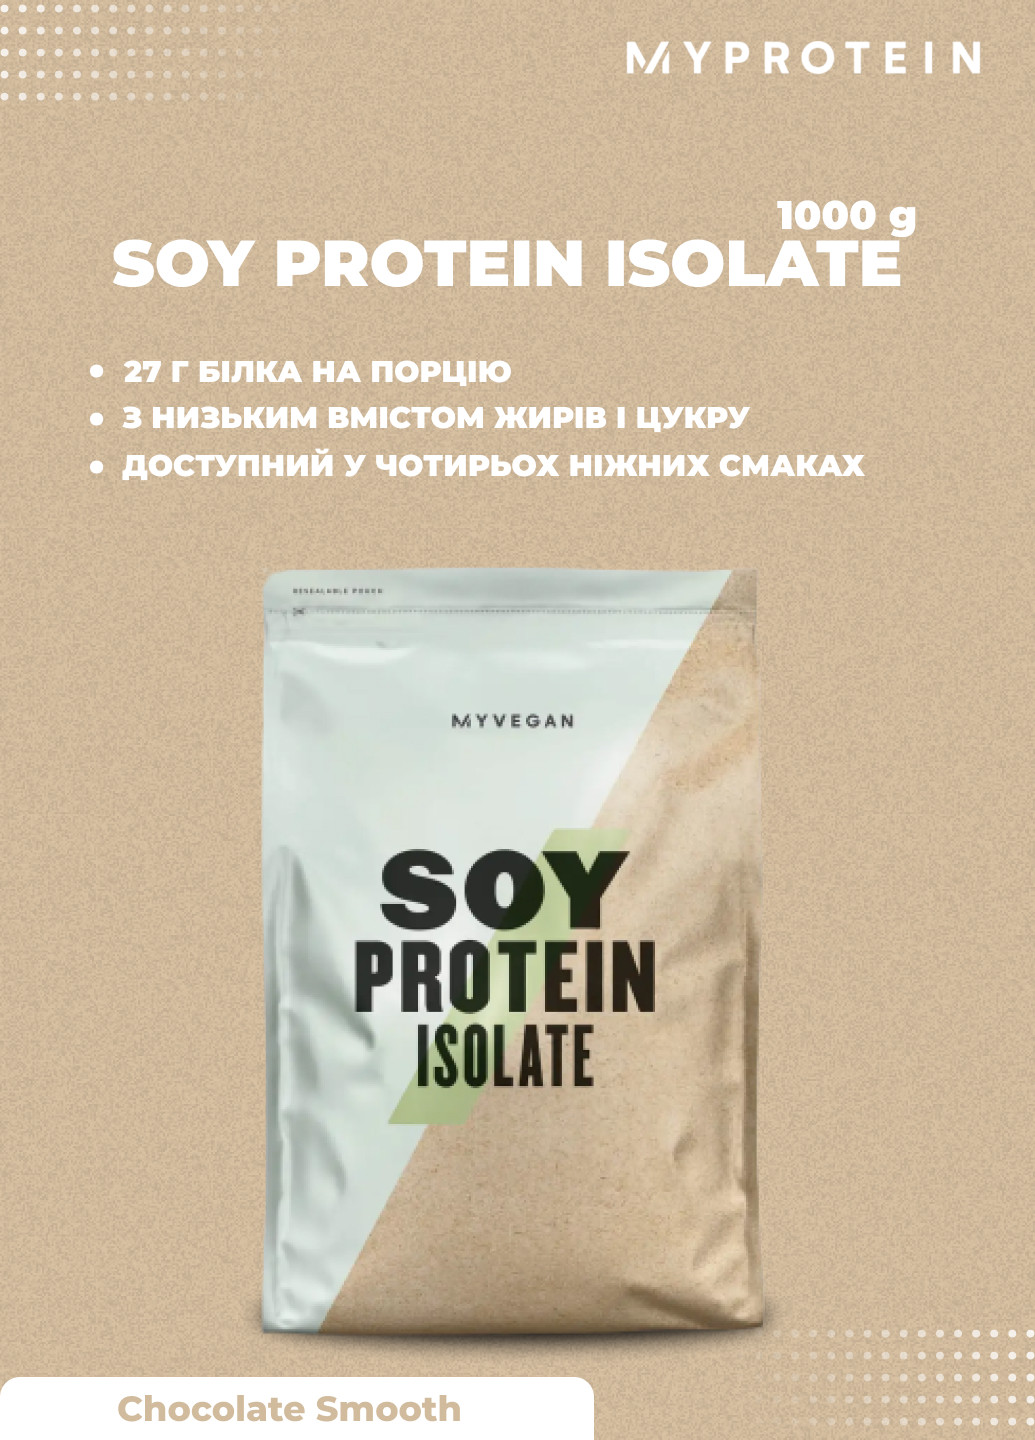 Протеин Soy Protein Isolate 1000g Chocolate Smooth My Protein (252446691)